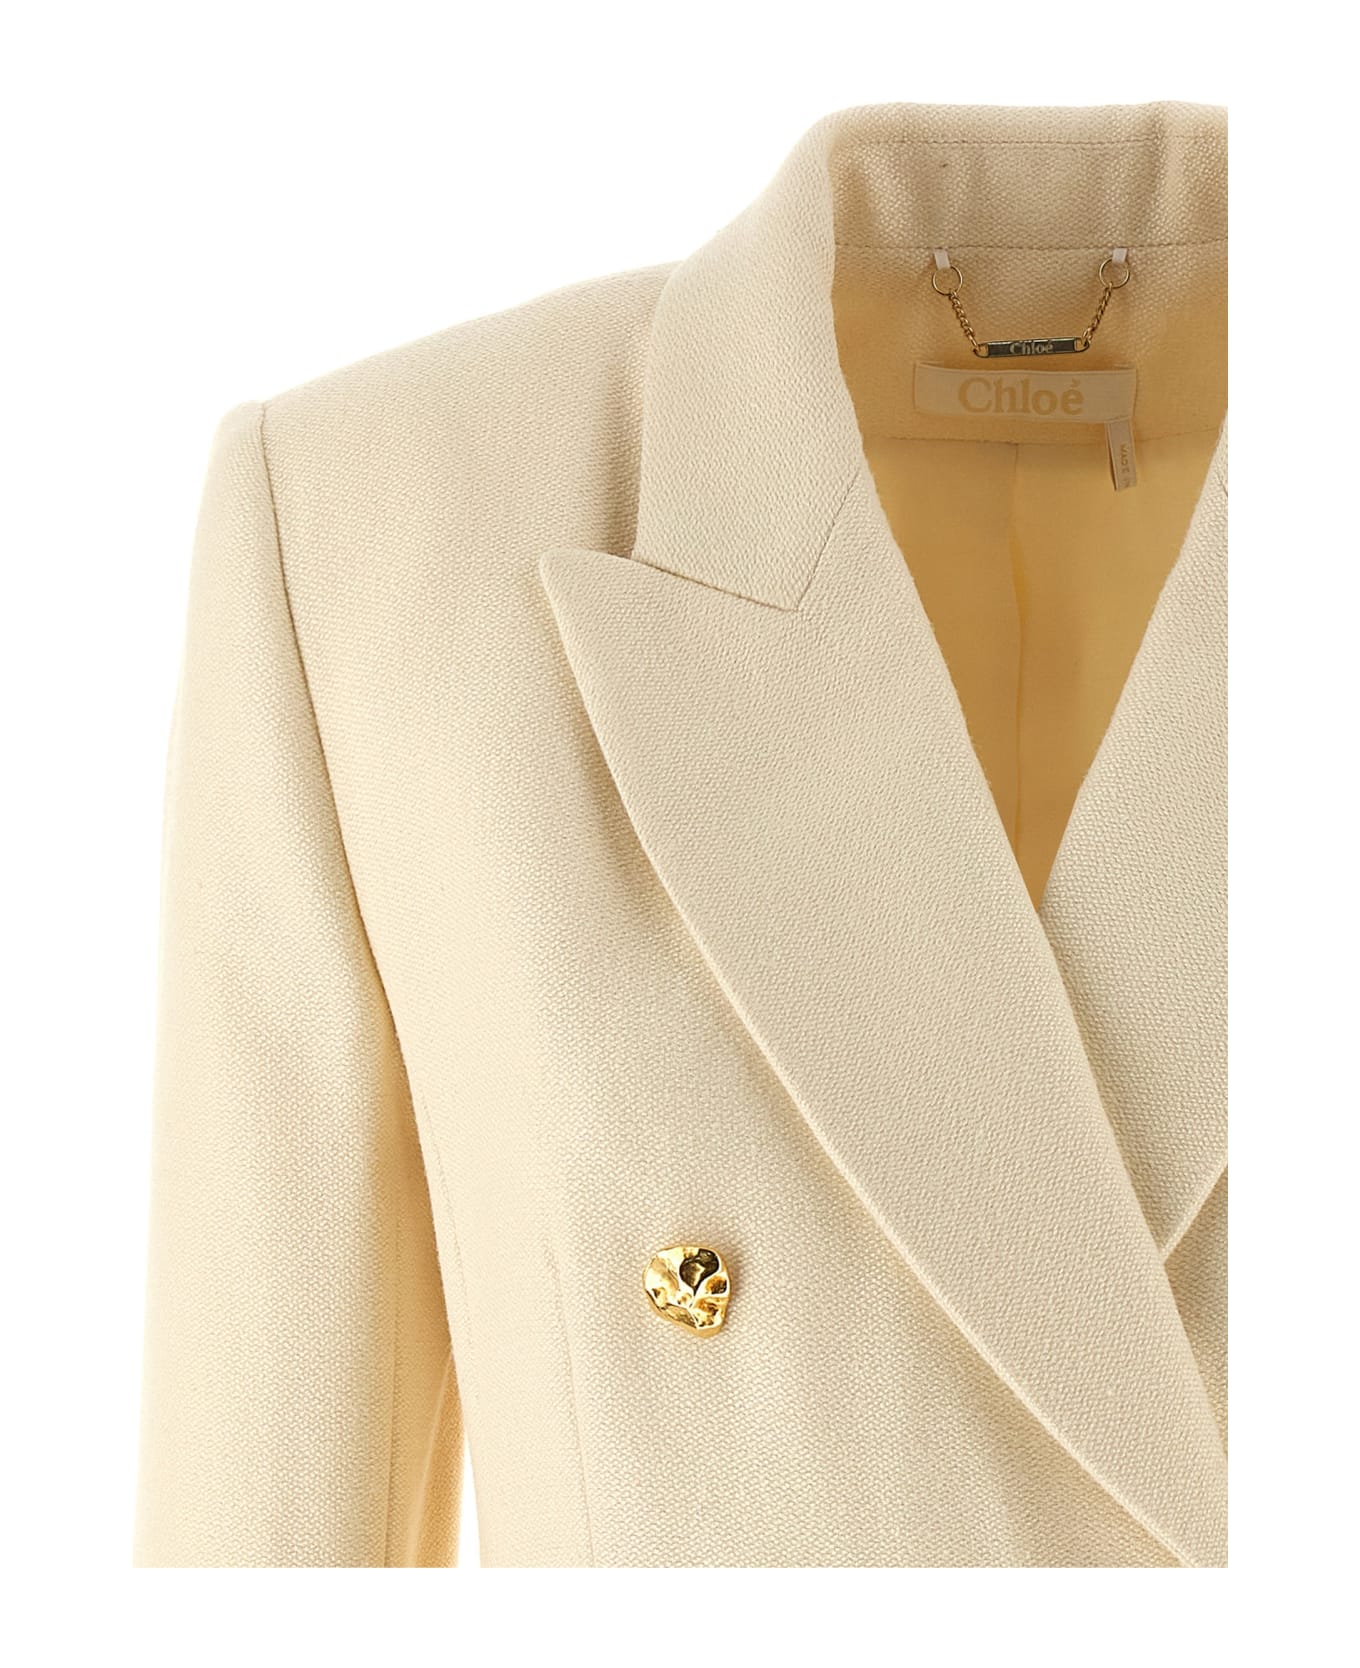 Chloé Tailored Double-breasted Blazer - White